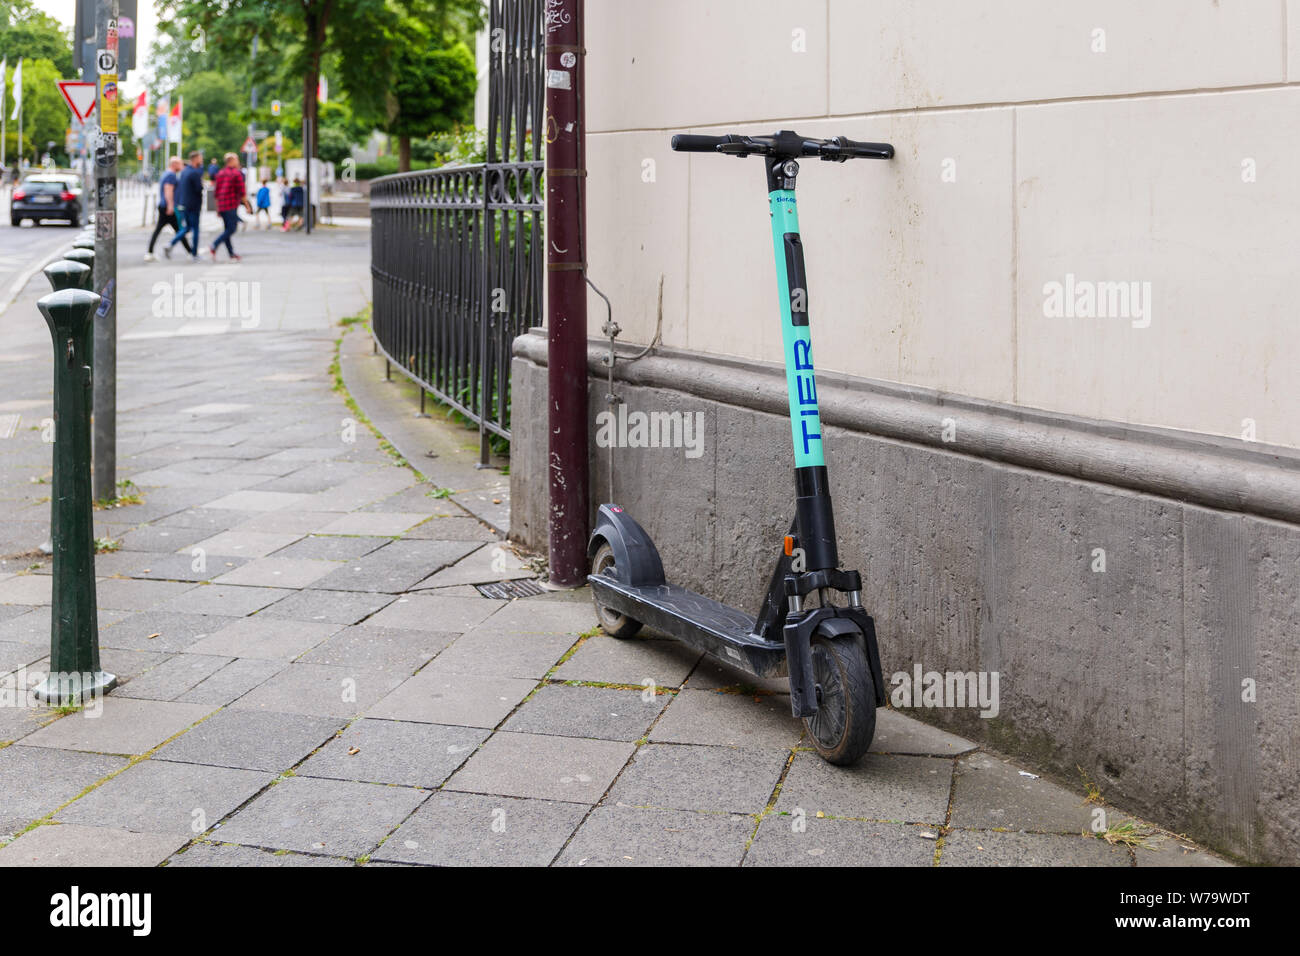 Tier Scooter High Resolution Stock Photography and Images - Alamy